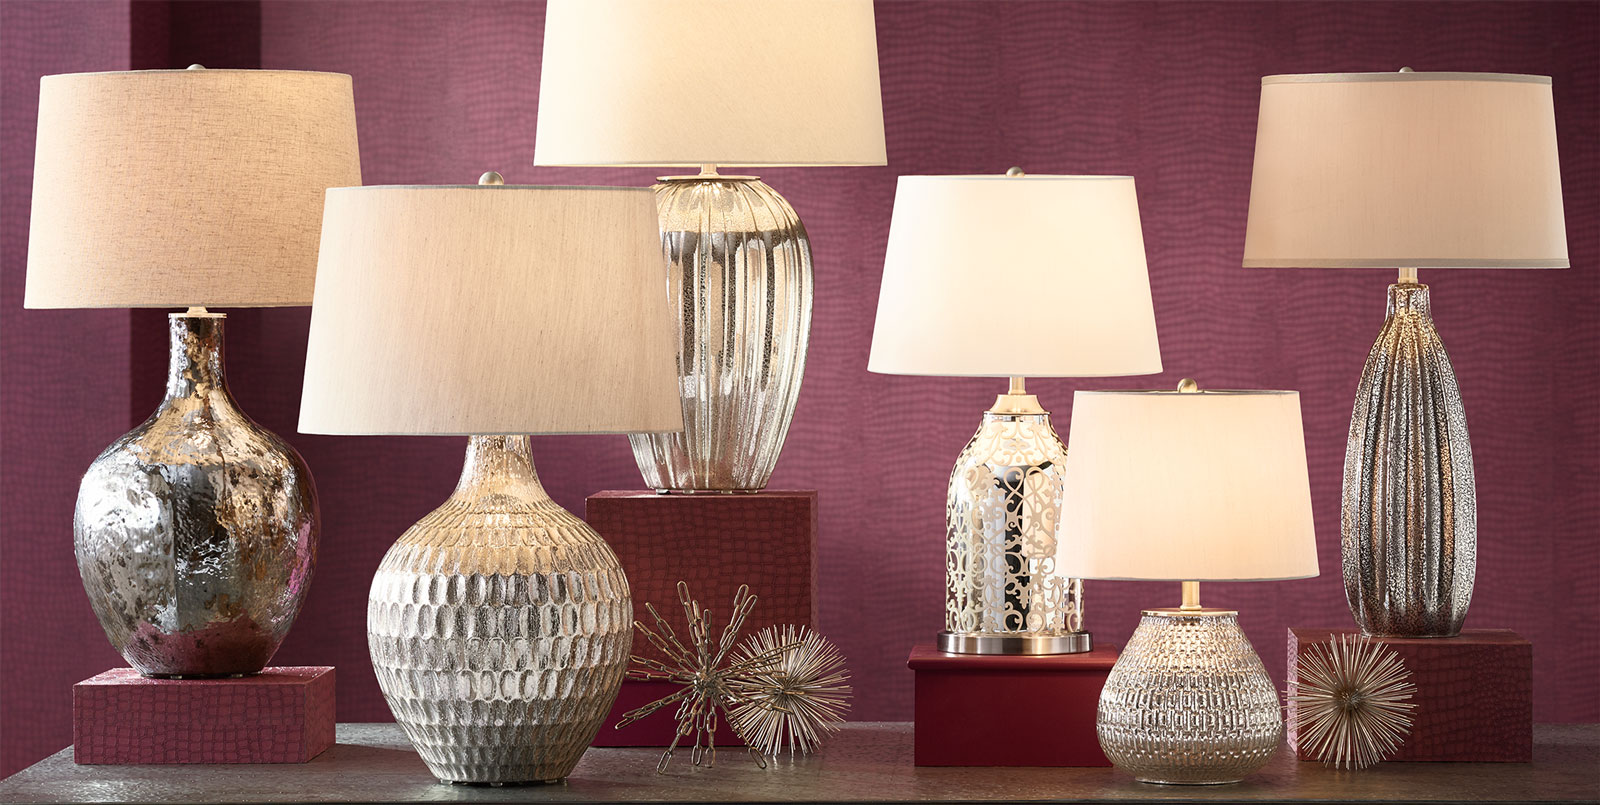 How To Select The Perfect Table Lamp, How To Determine Proper Table Lamp Height